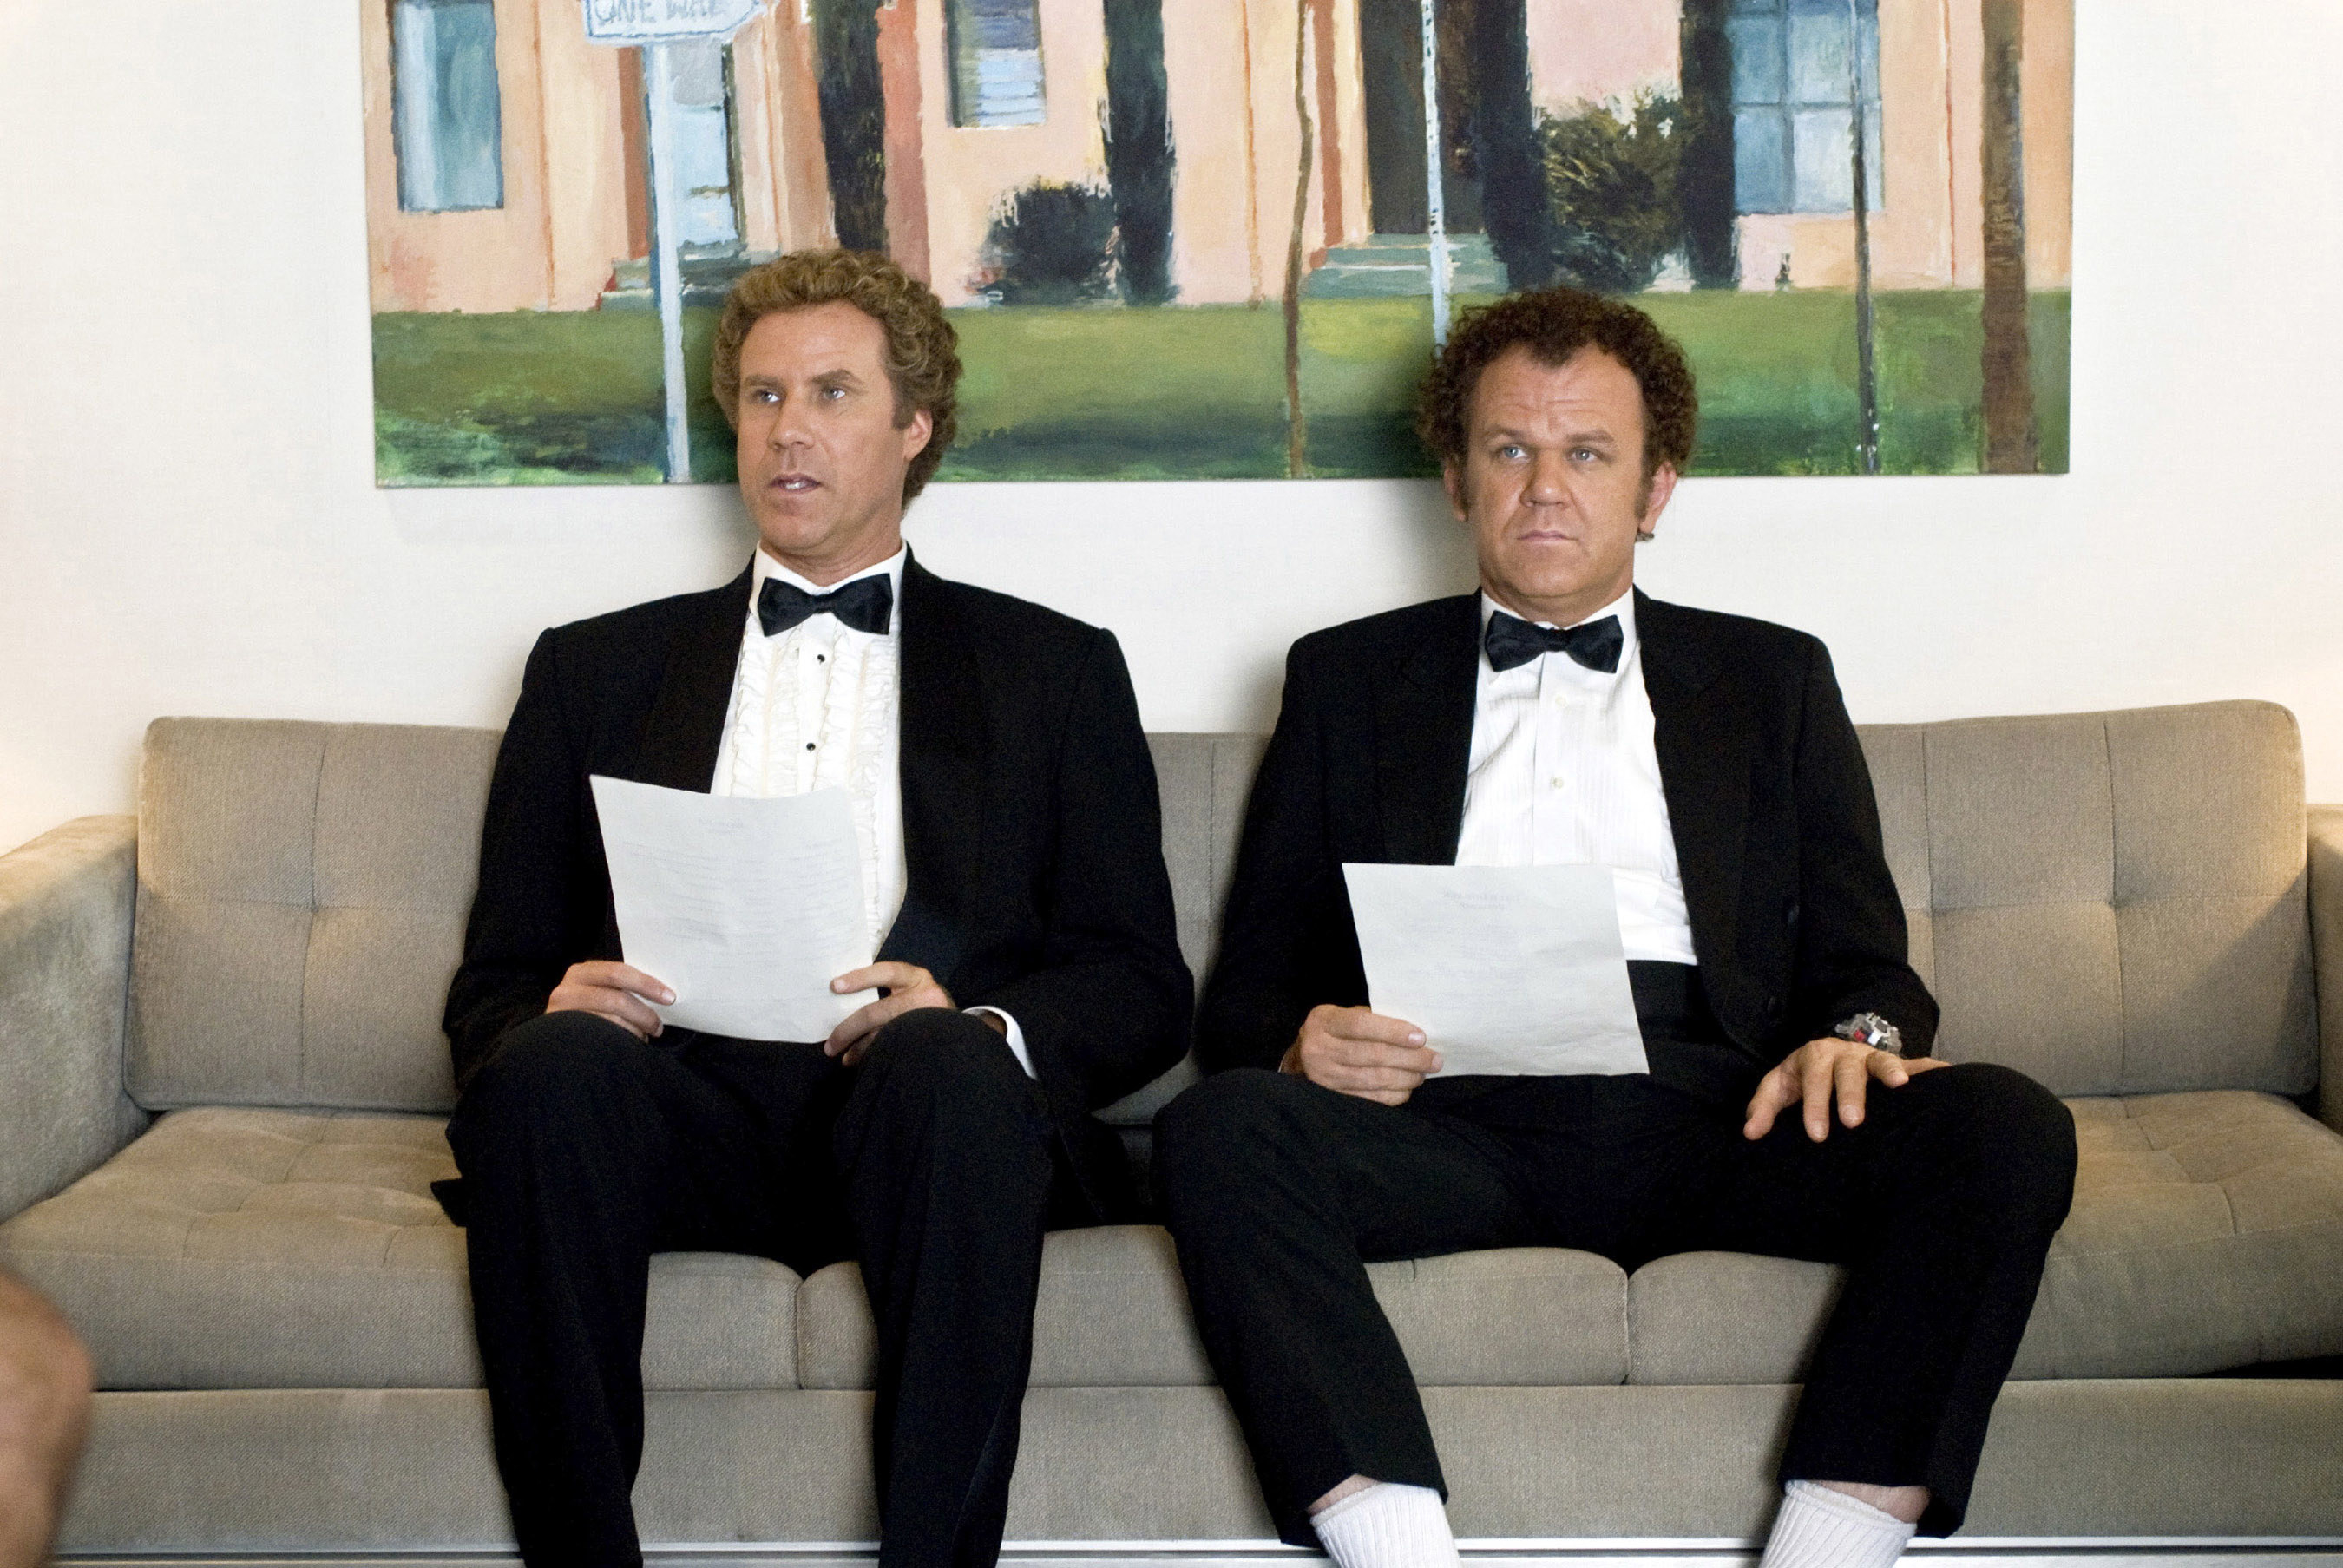 Ferrell and Reilly hold resumes while sitting on a couch and wearing tuxedos